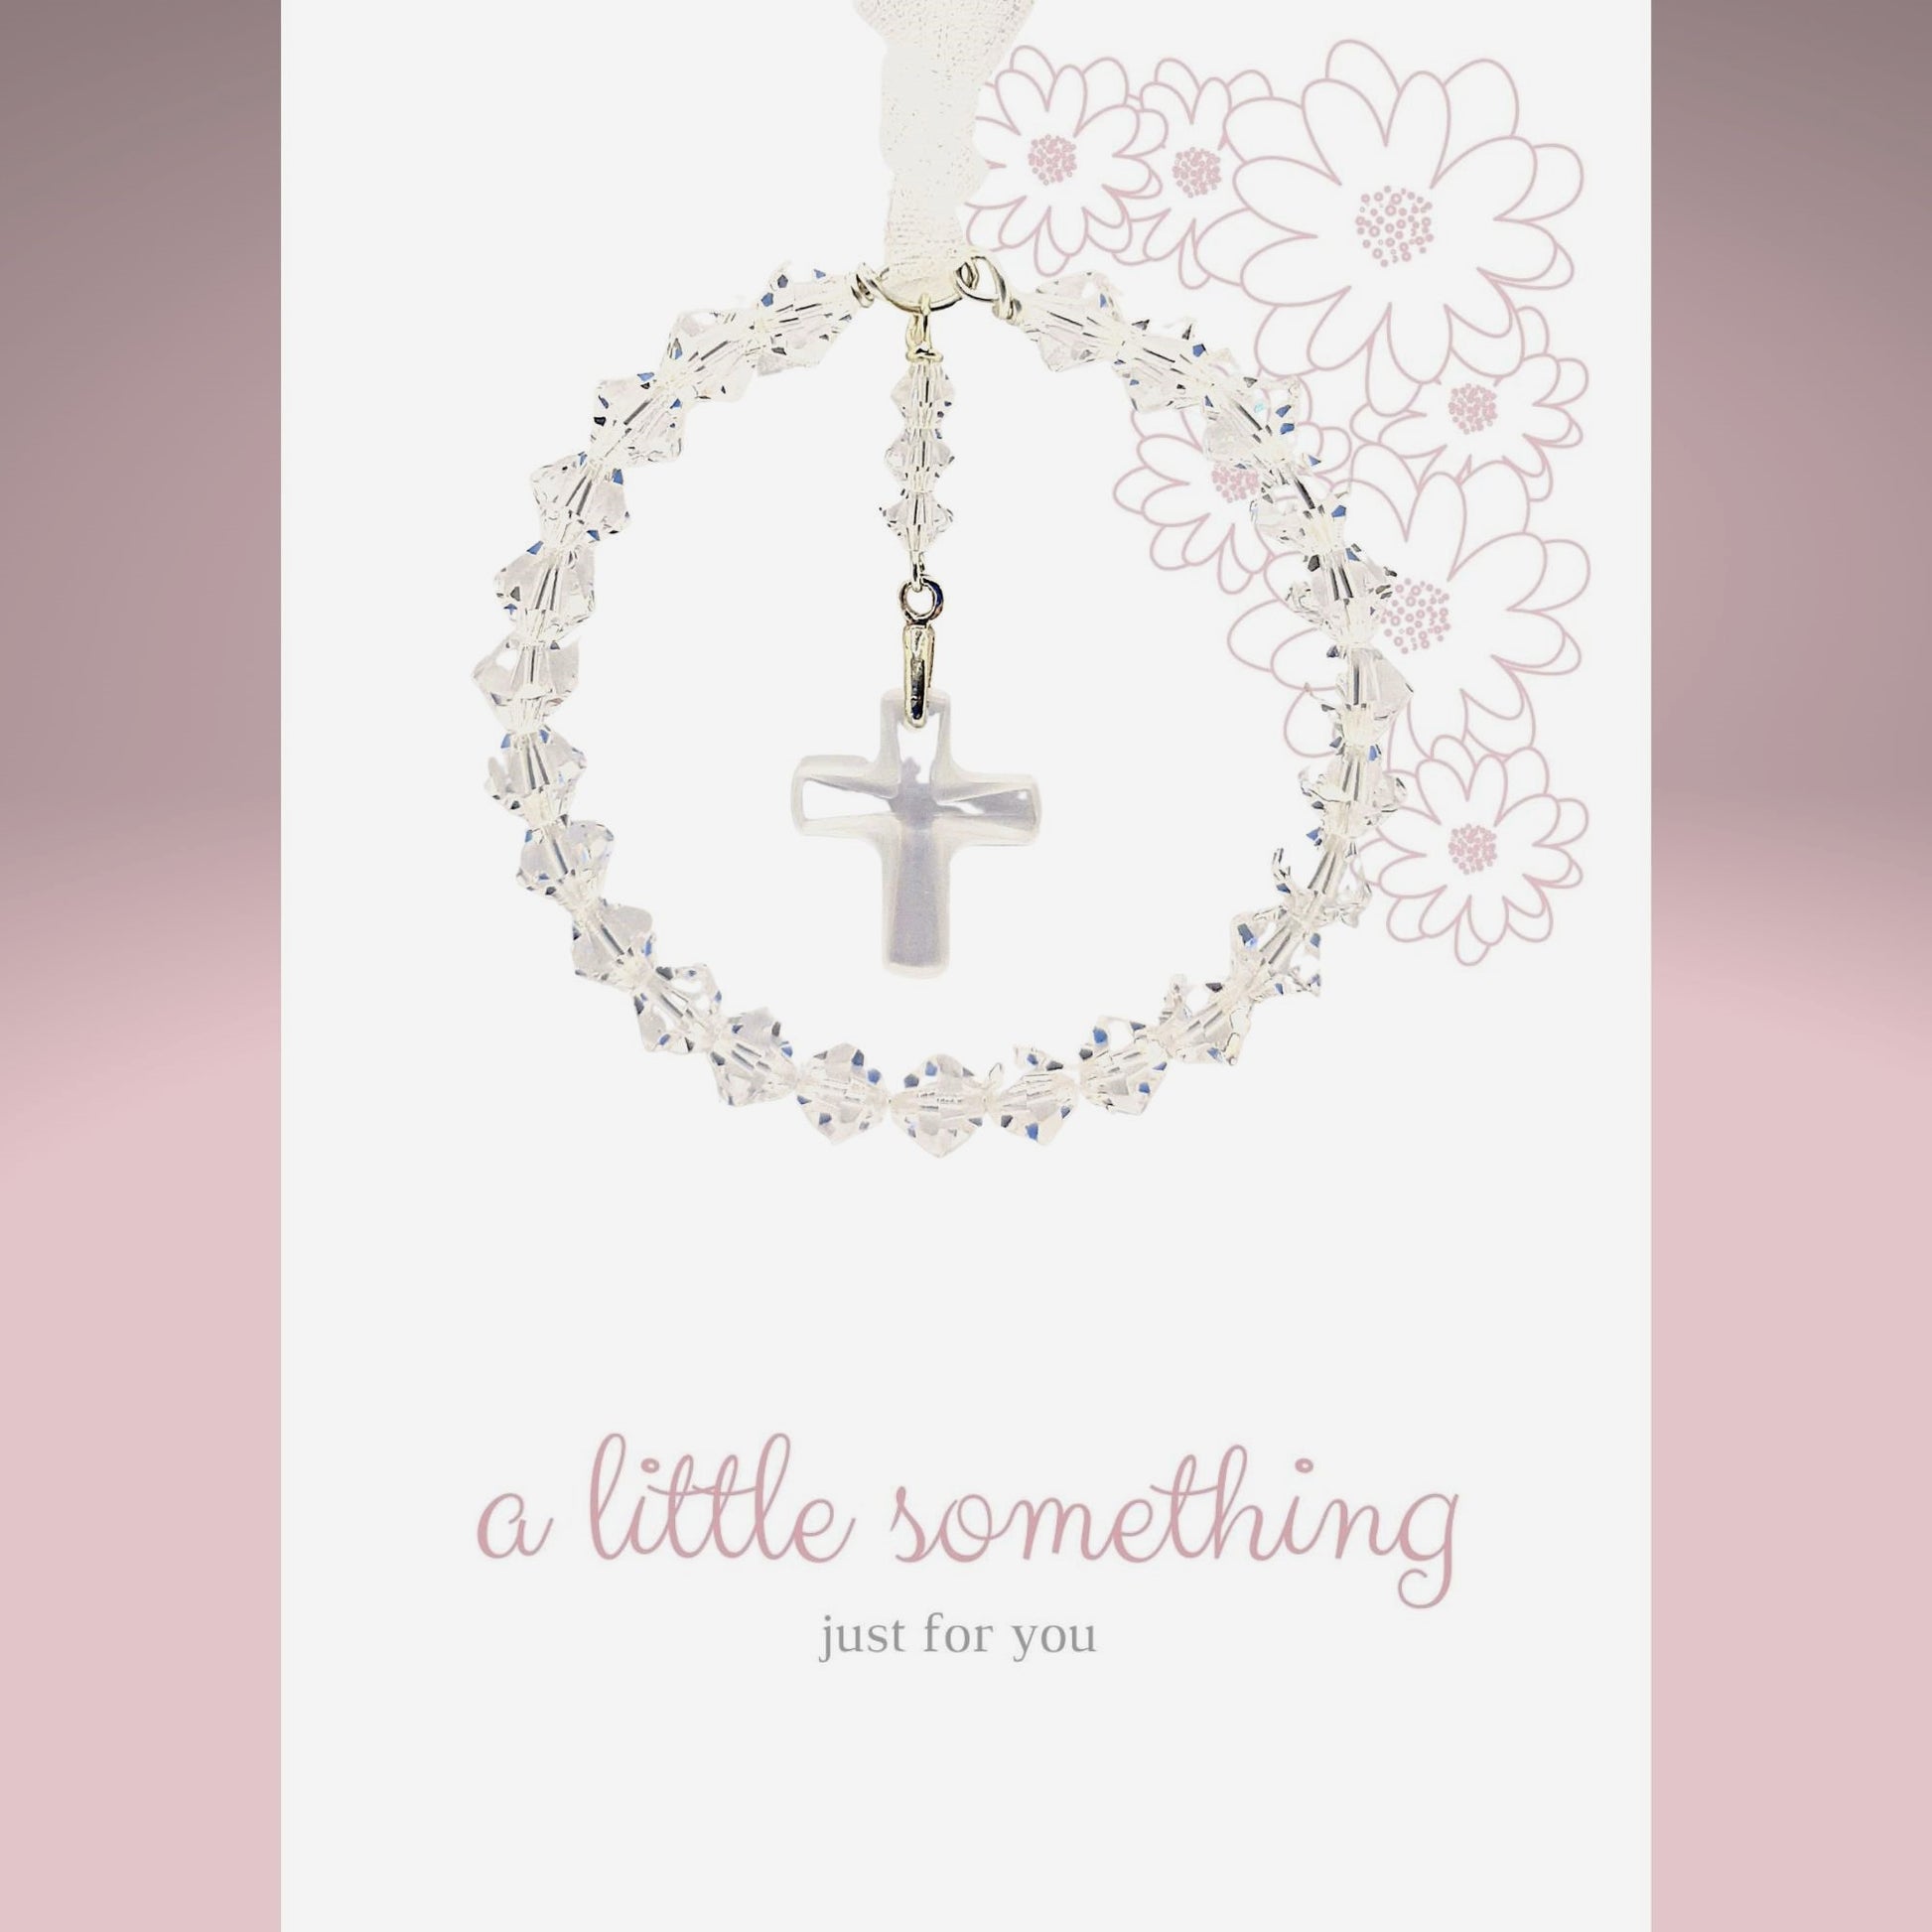 A circle of high grade austrian crystals surrounds a crystal cross suspended from the centre of the circle. Sparkling crystal ribbon completes the charm. Shown on a pre-printed card with the message "a little something just for you"